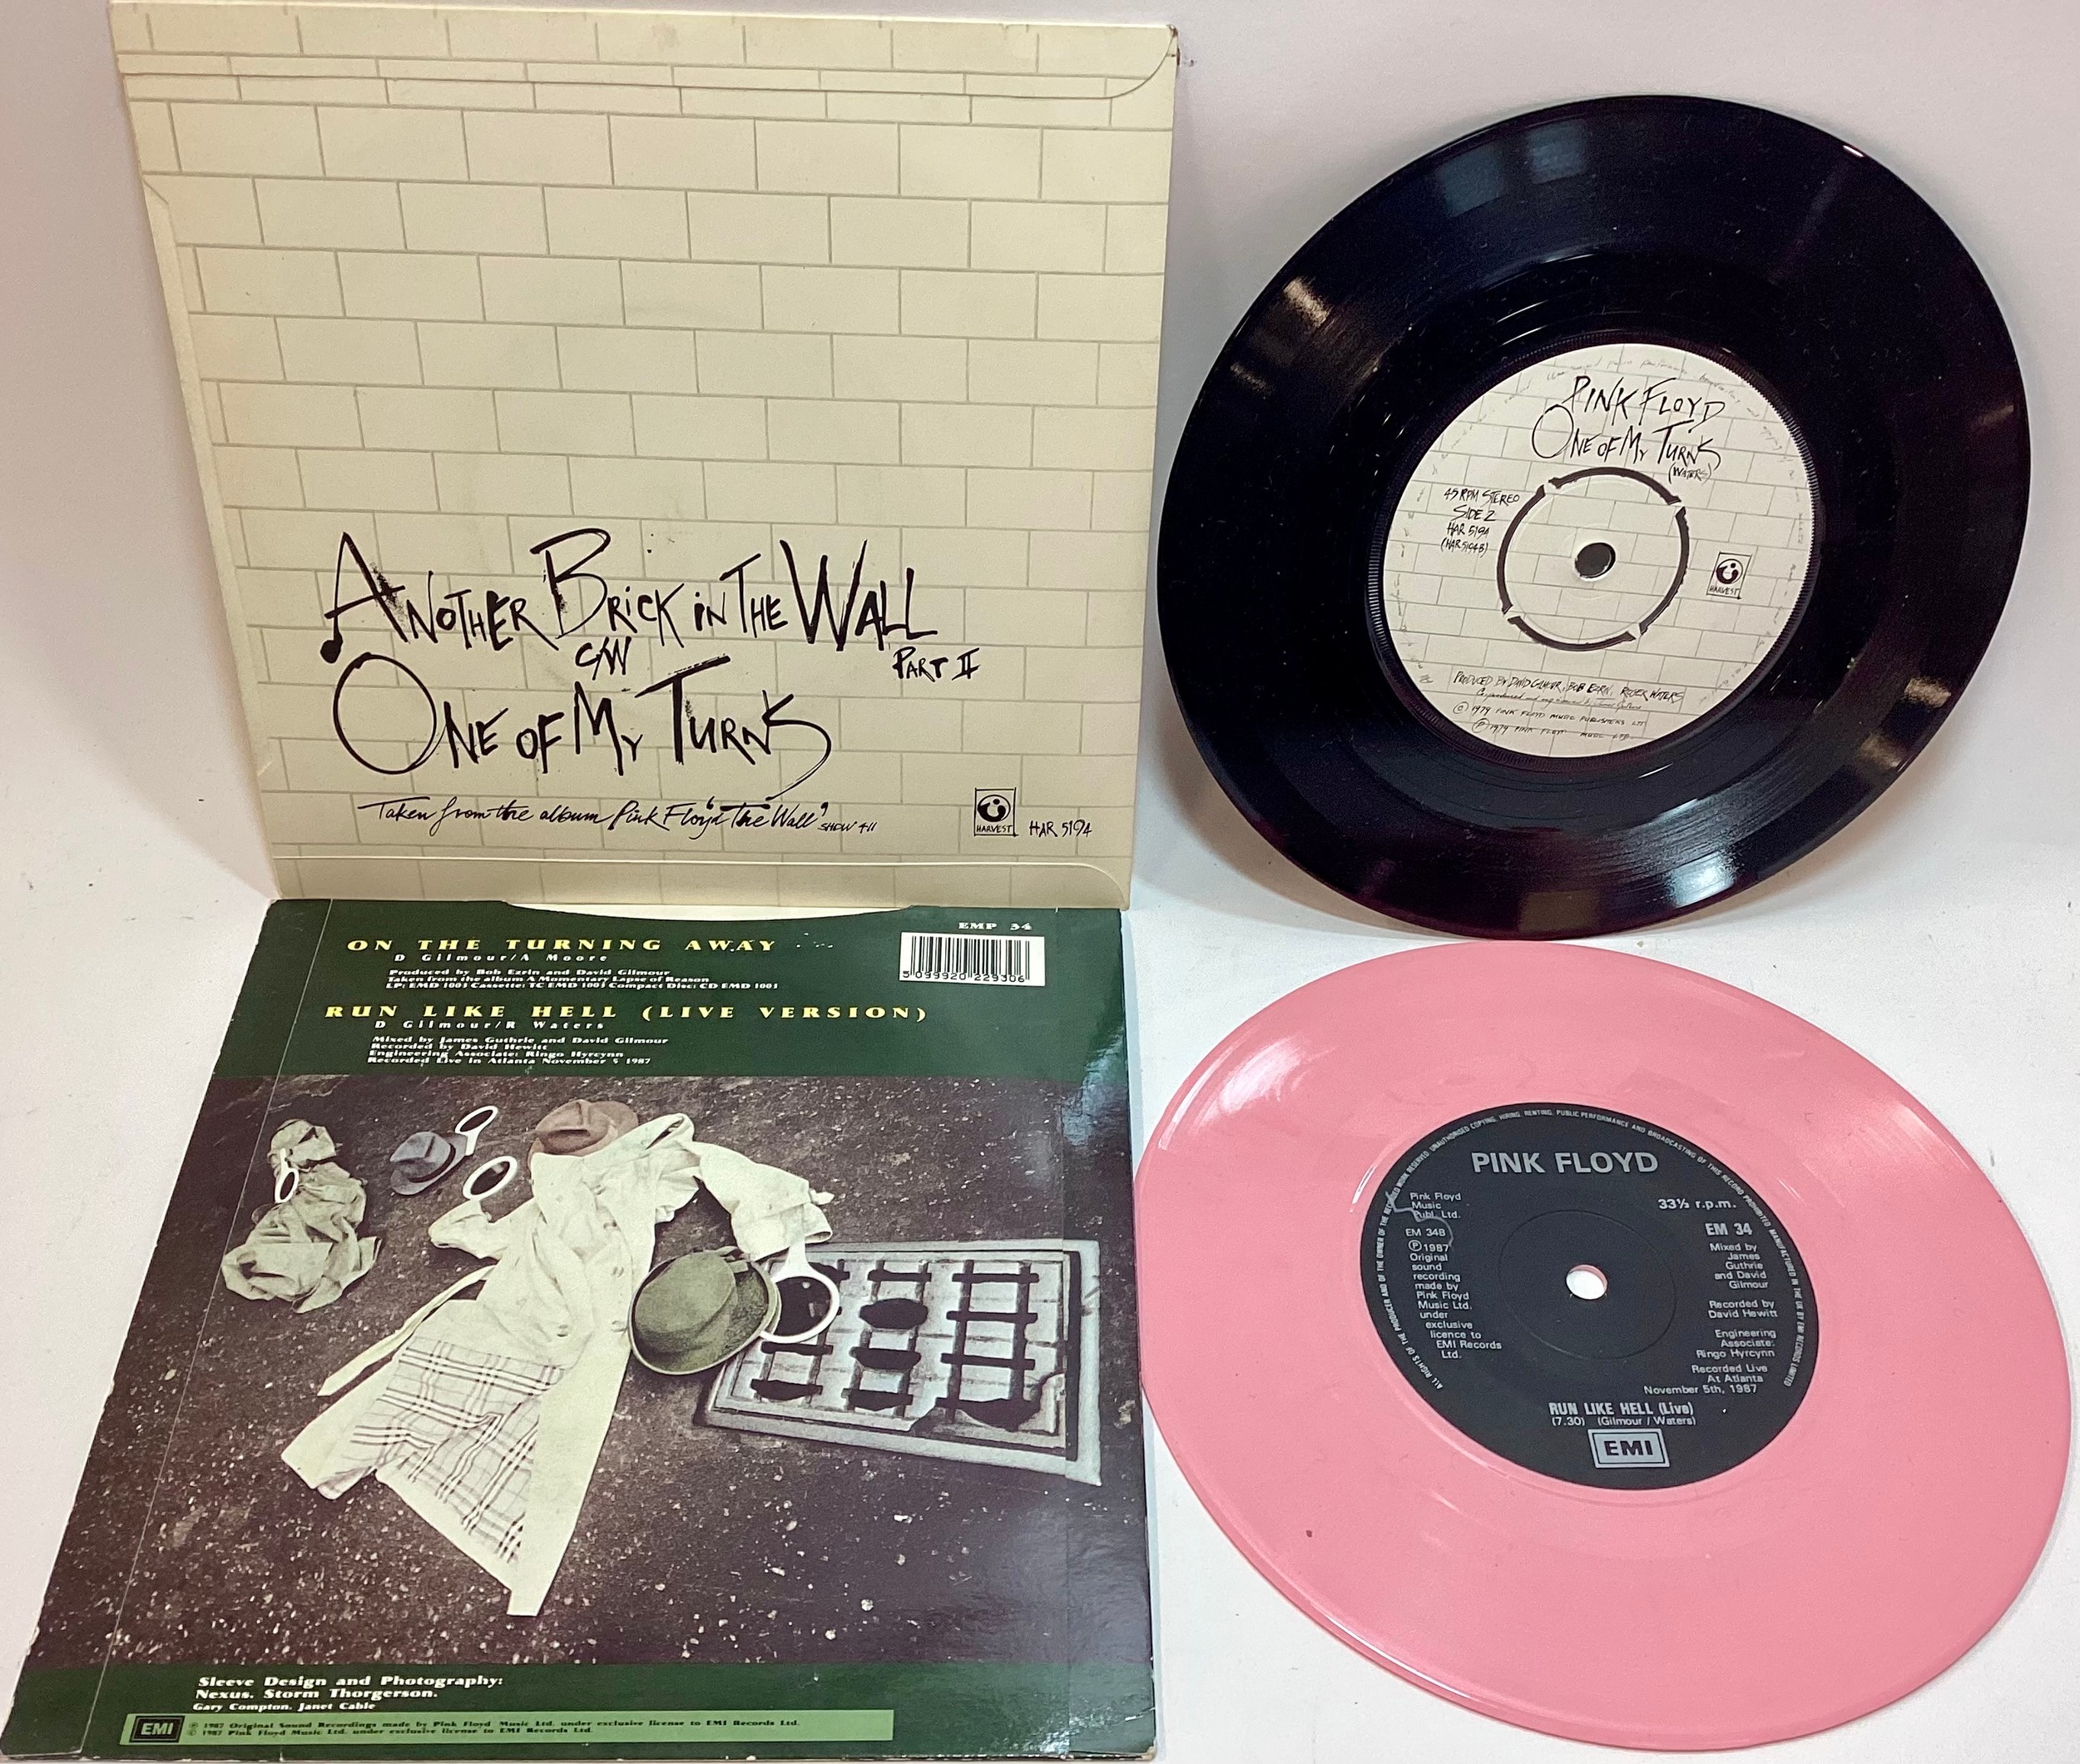 PINK FLOYD - ‘ON THE TURNING AWAY & ANOTHER BRINK IN THE WALL’ 7” SINGLES. On HARVEST HAR 5194 - Image 2 of 2